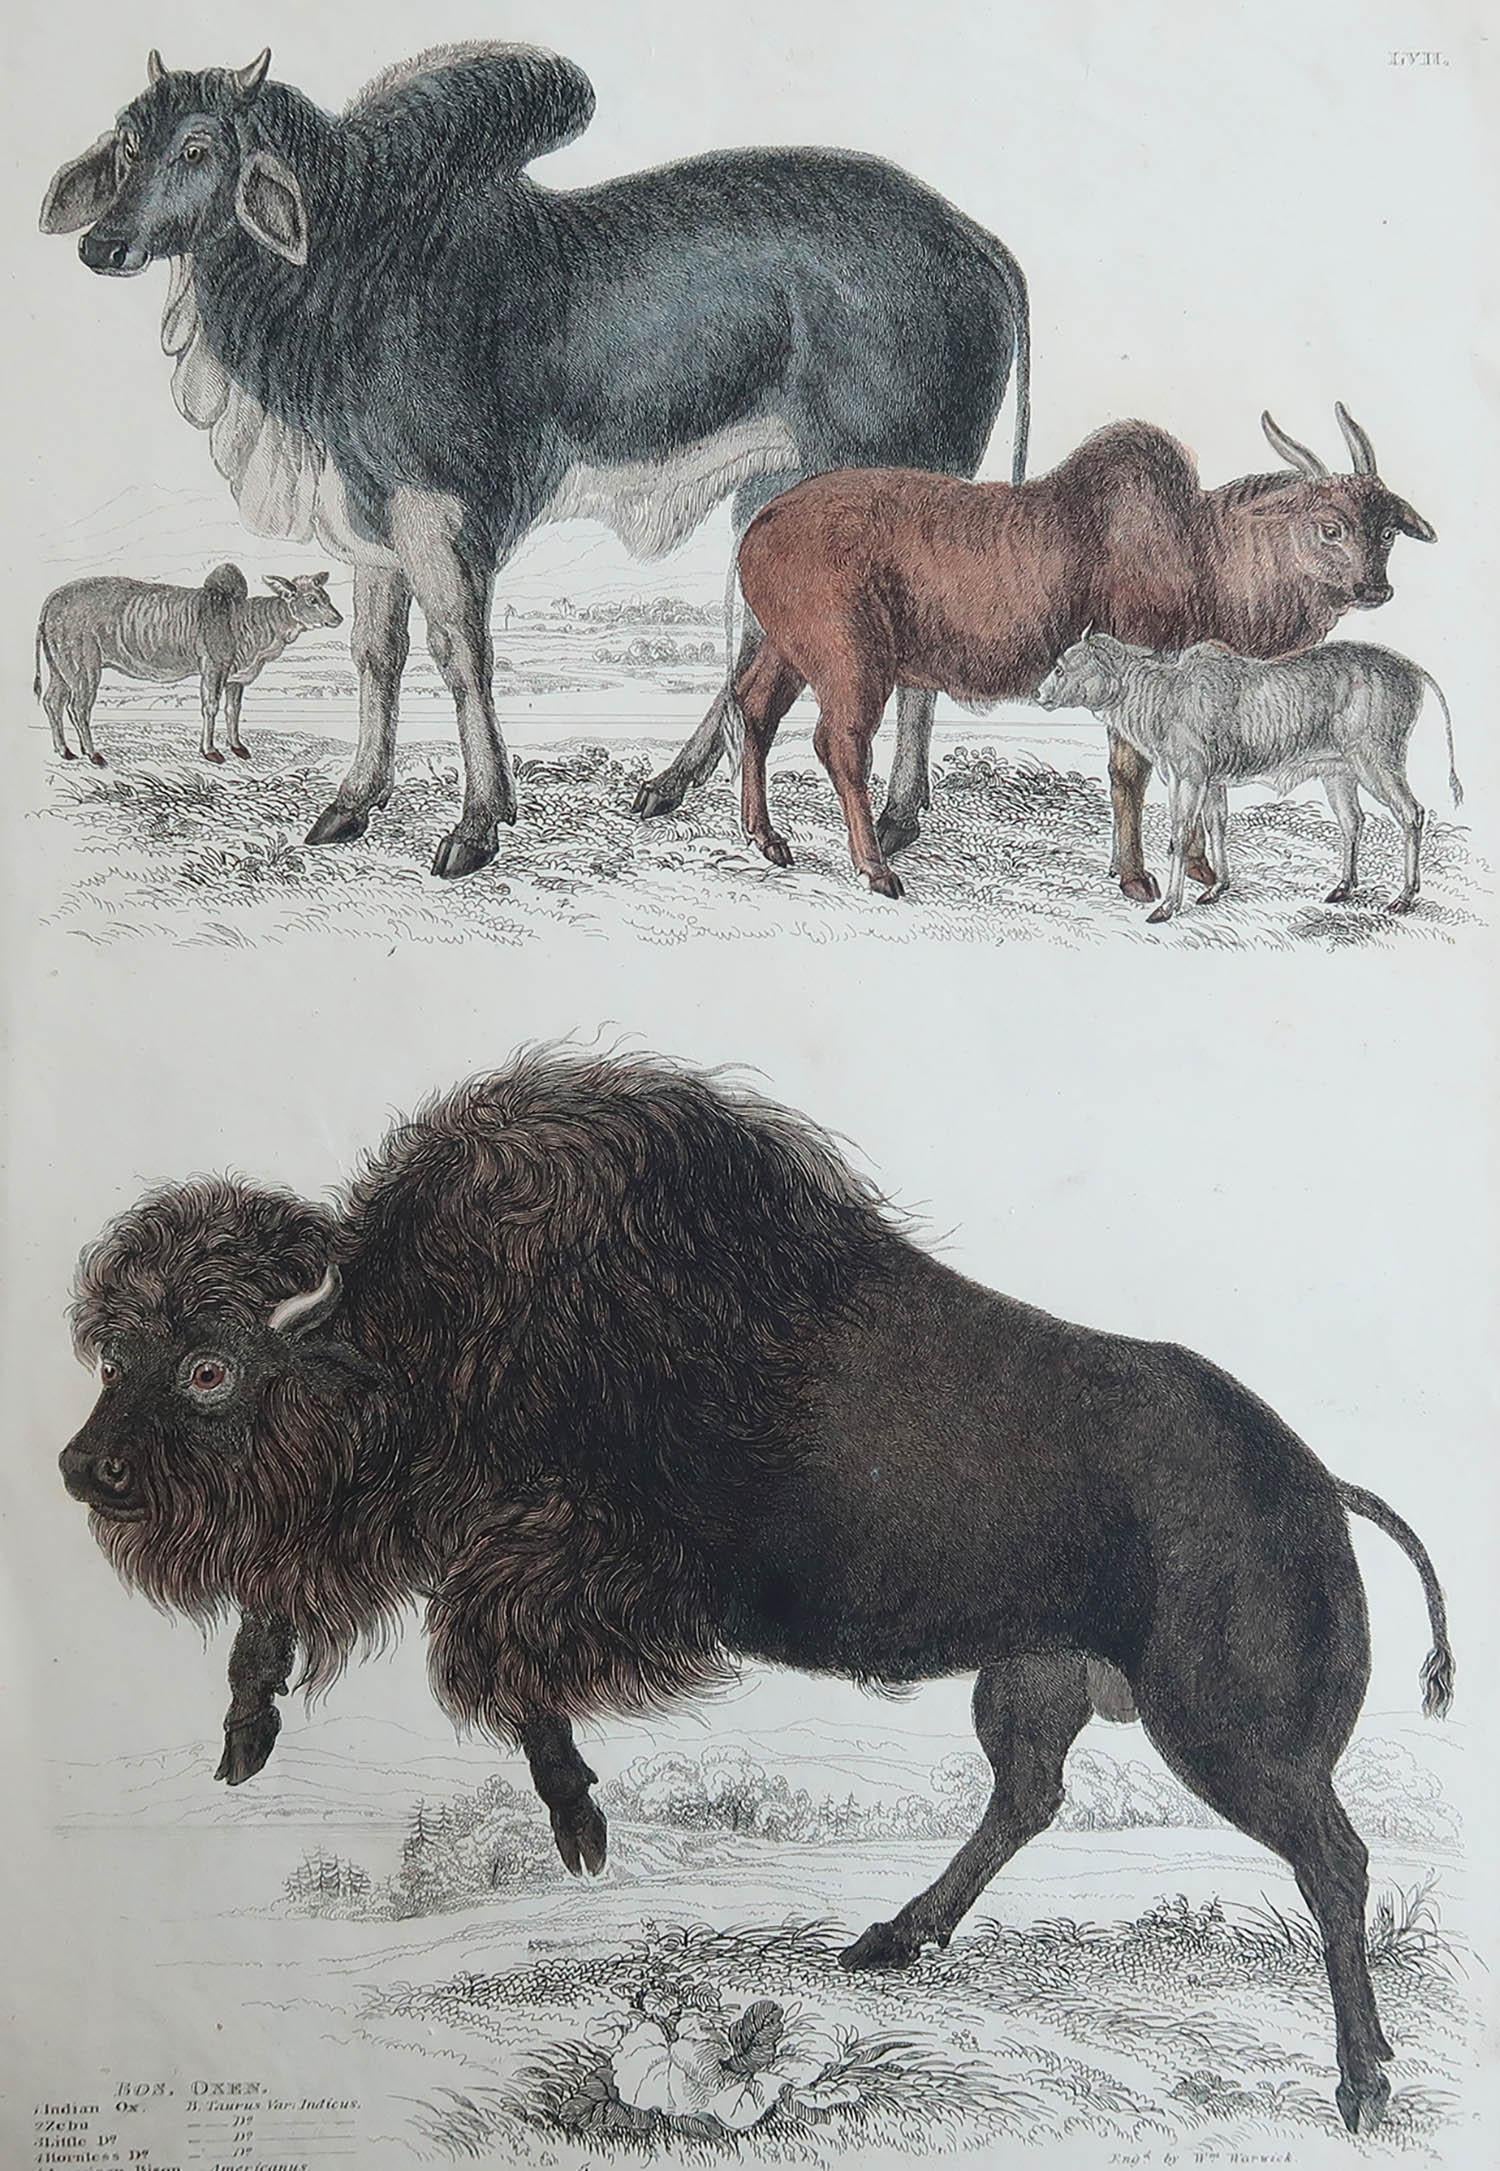 Great image of an American bison and Indian ox.

Unframed. It gives you the option of perhaps making a set up using your own choice of frames.

Lithograph after Cpt. Brown and Marechal with original hand color.

Published circa 1835

Free